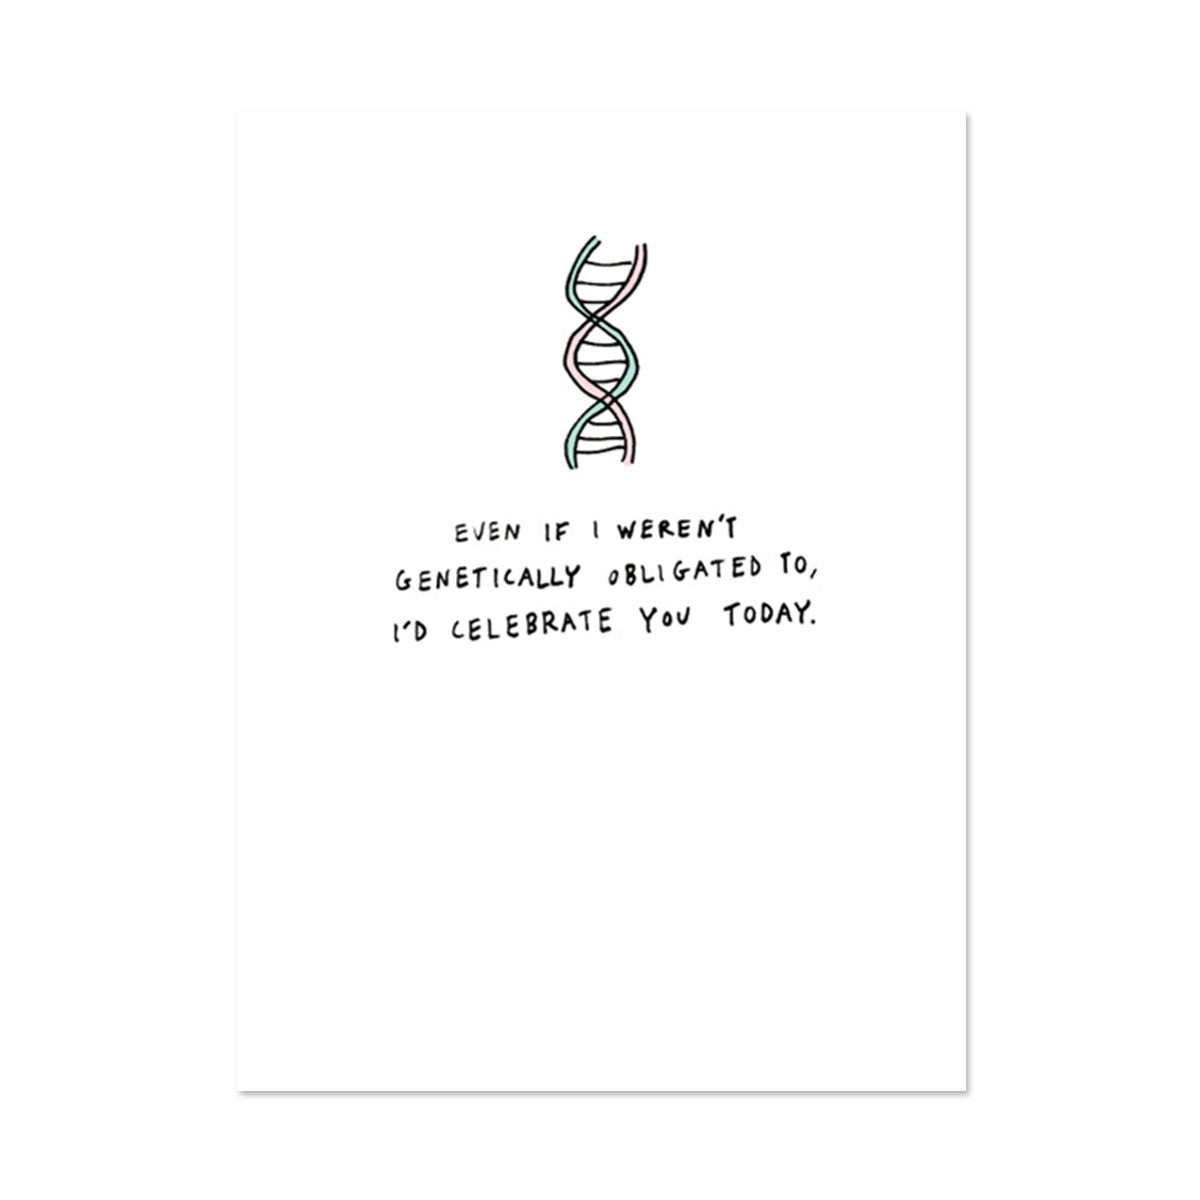 GENETICALLY OBLIGATED DAD BIRTHDAY CARD BY PAPER REBEL